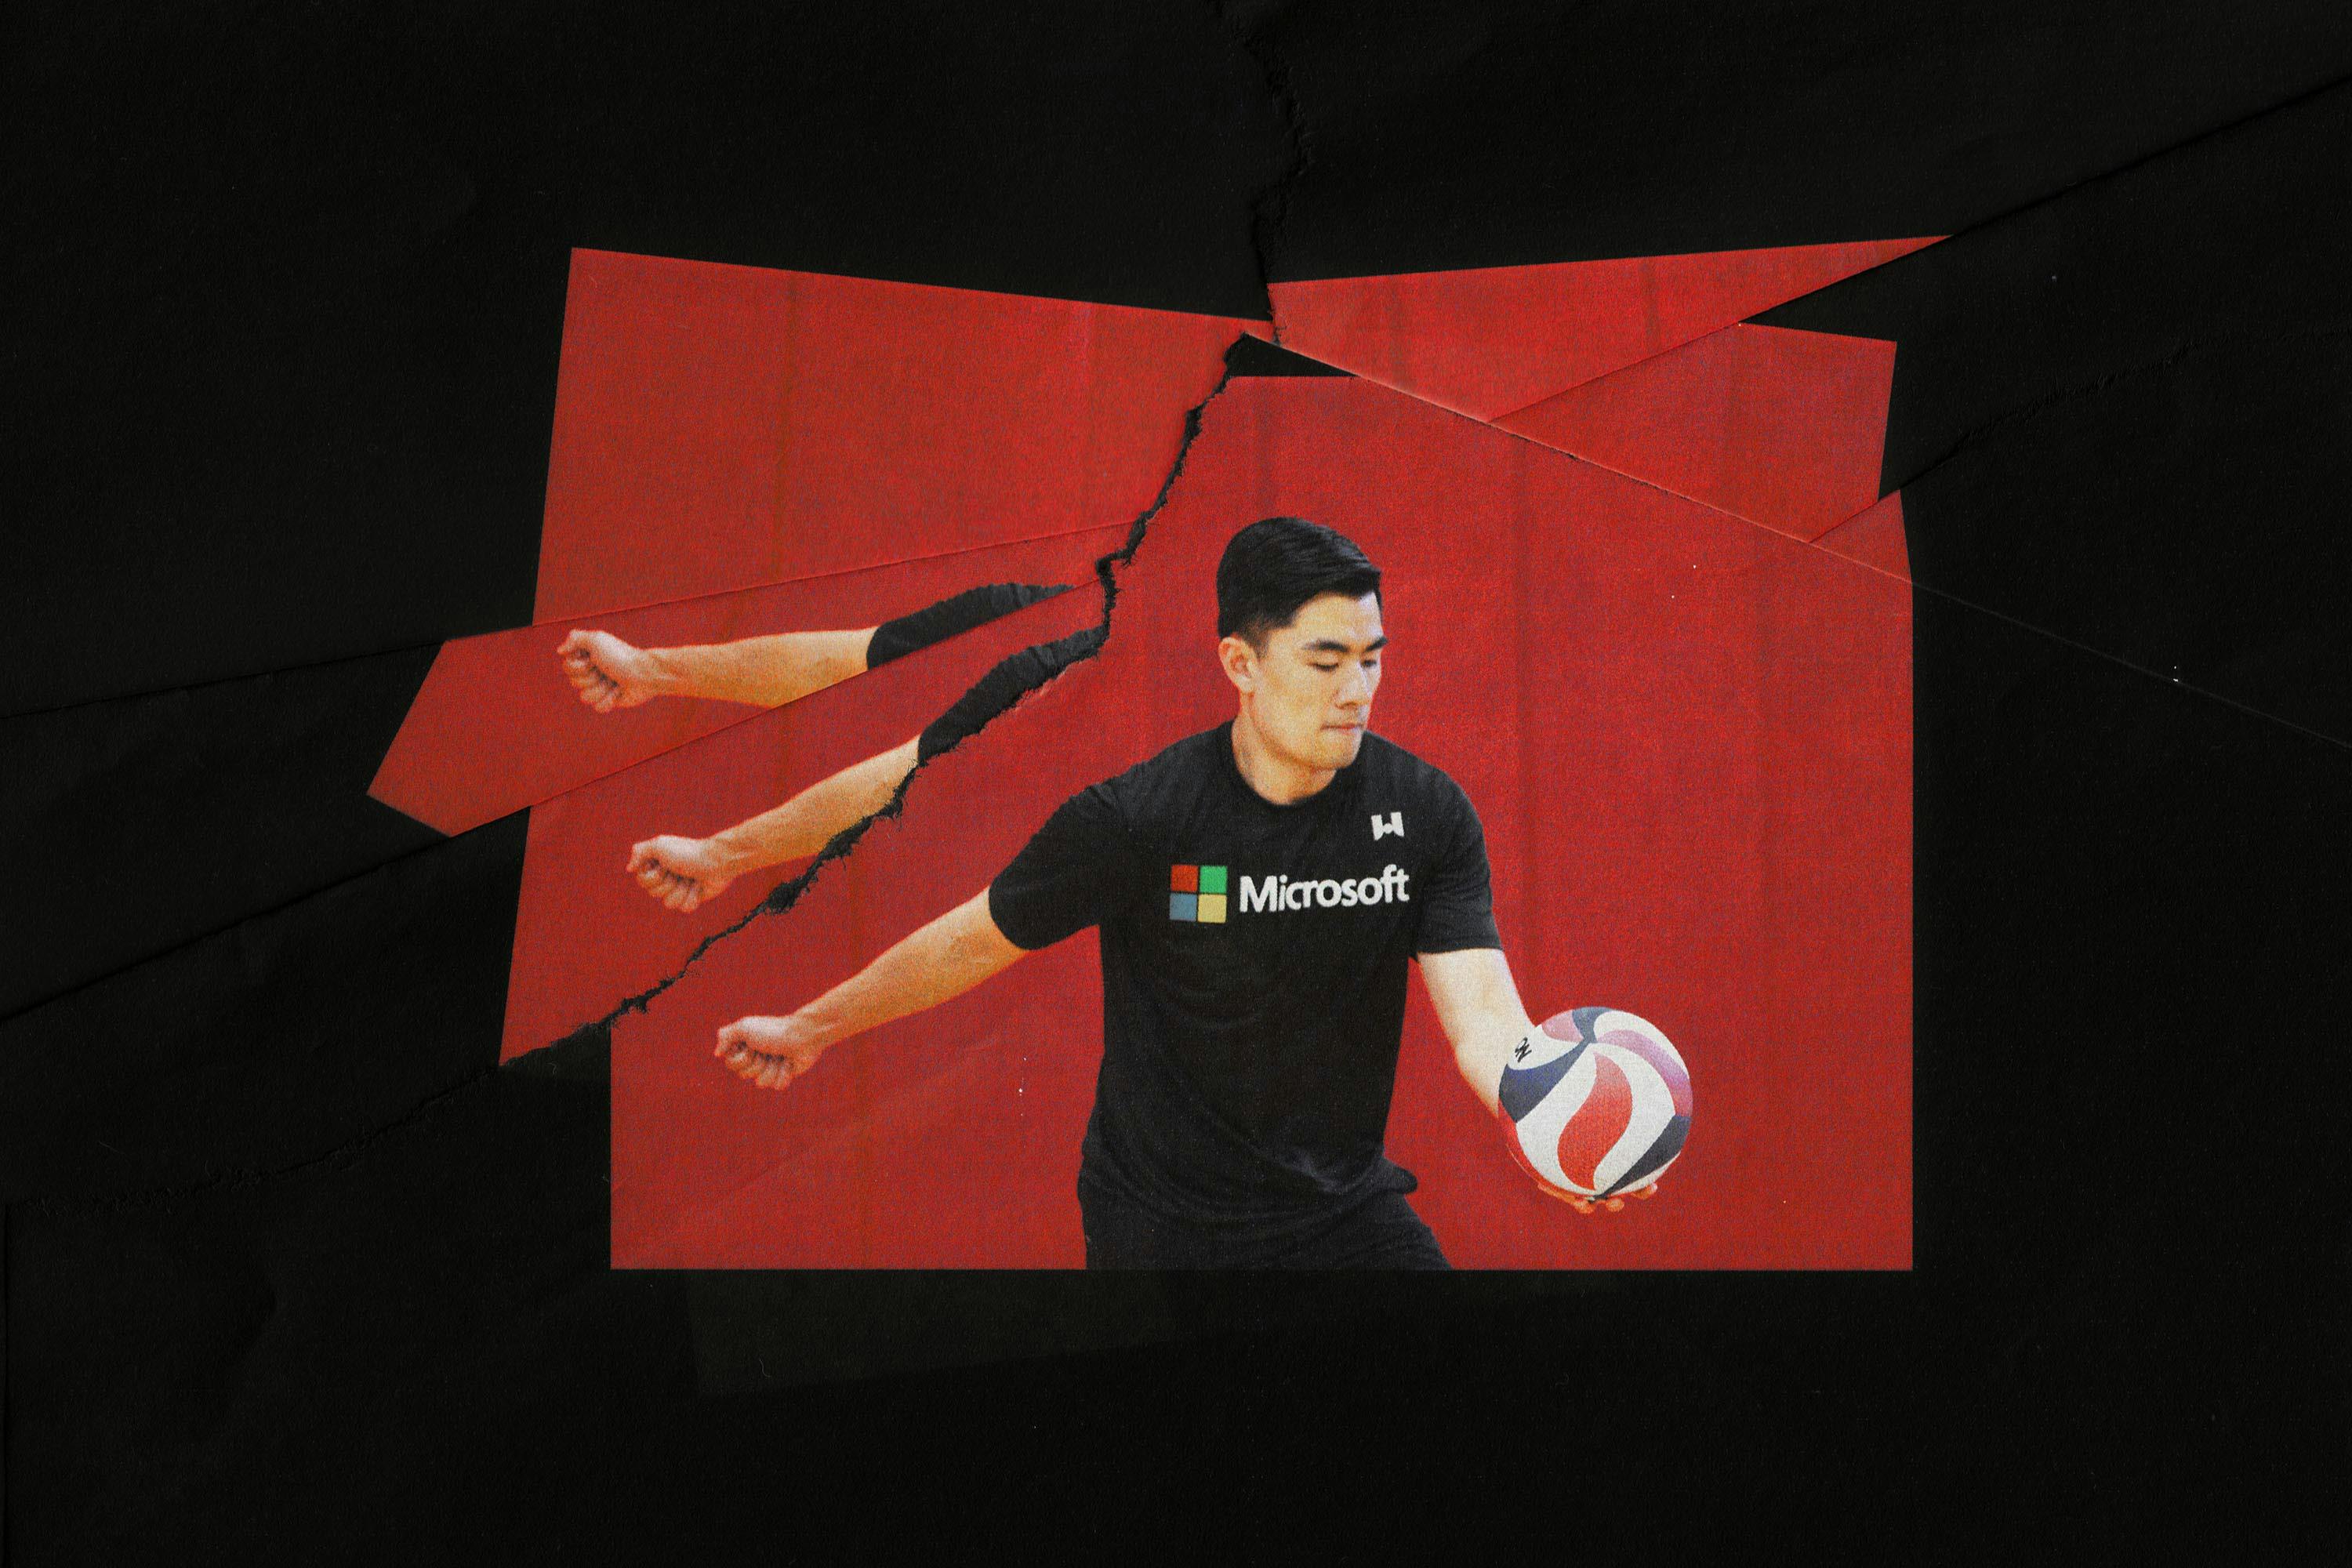 A volleyball player attempting to serve the ball